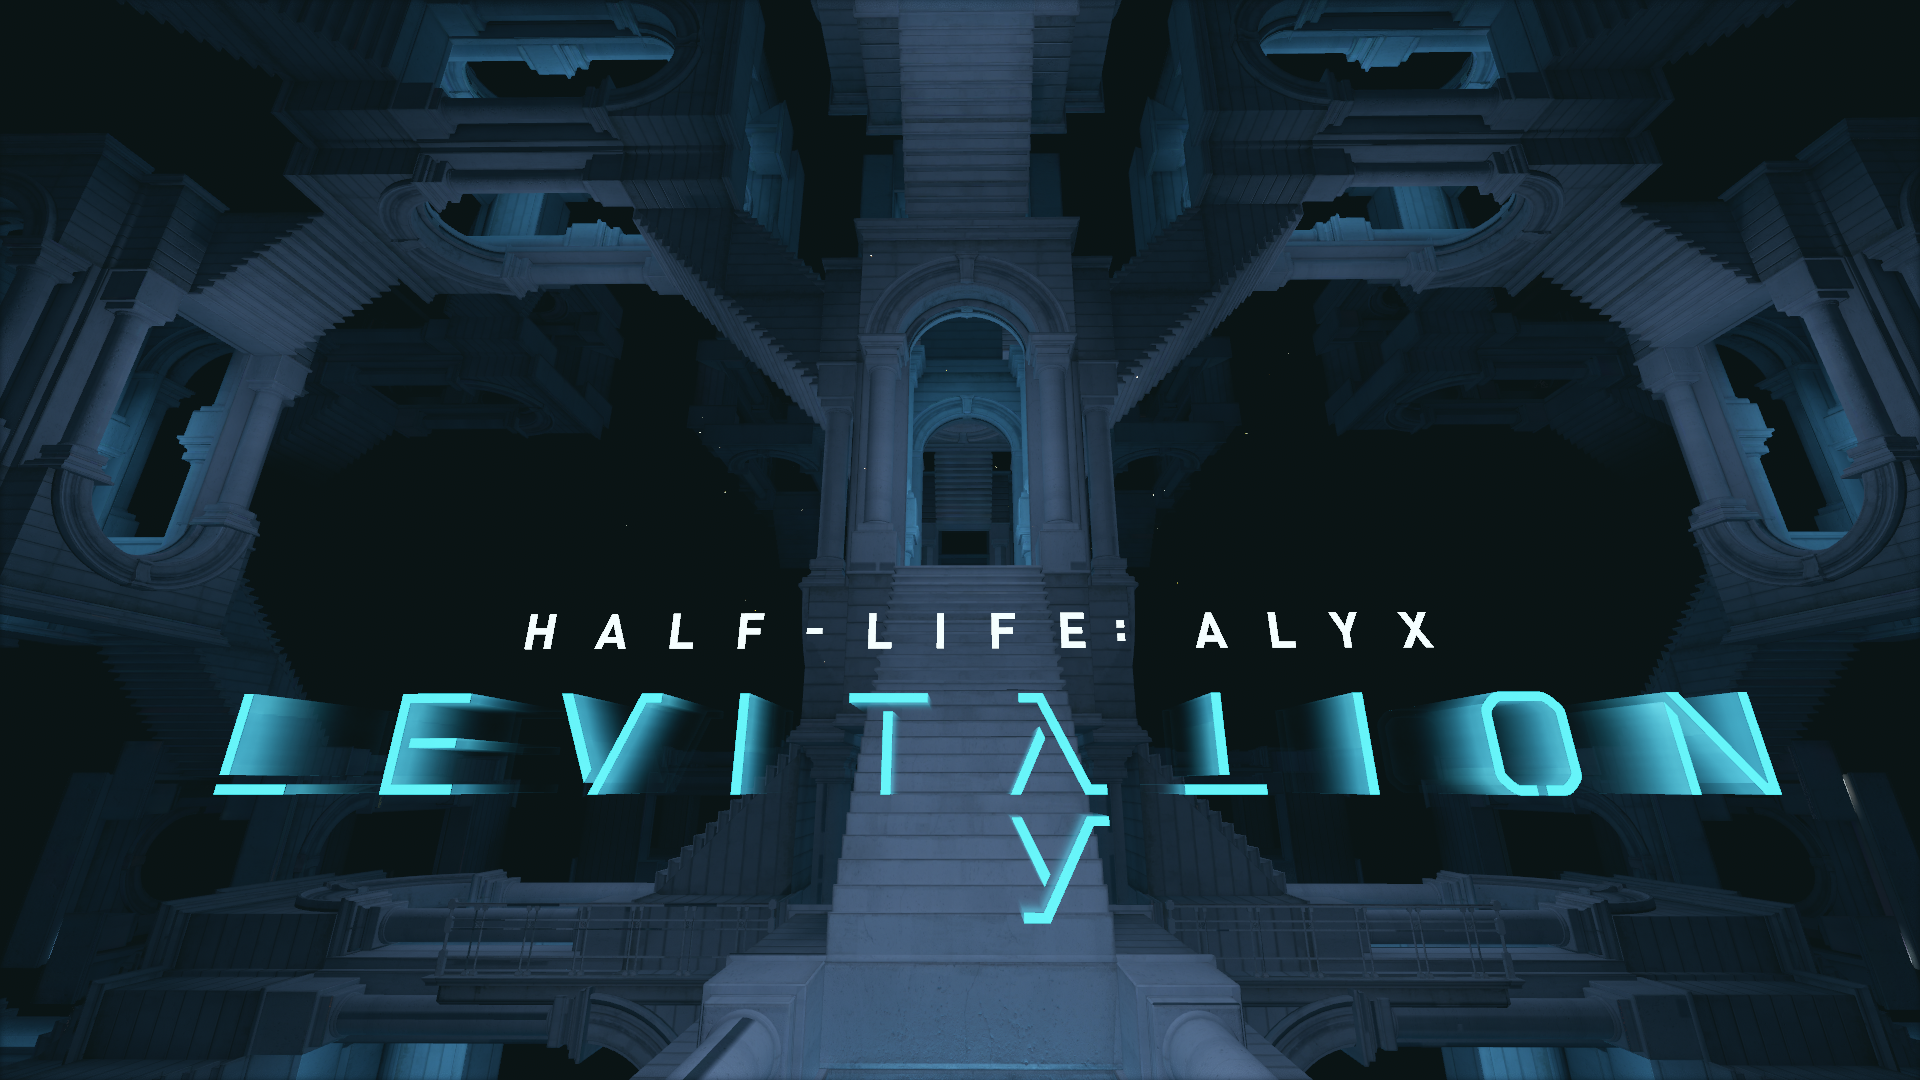 Half-Life: Alyx mod adds a whole new campaign to Valve's VR FPS